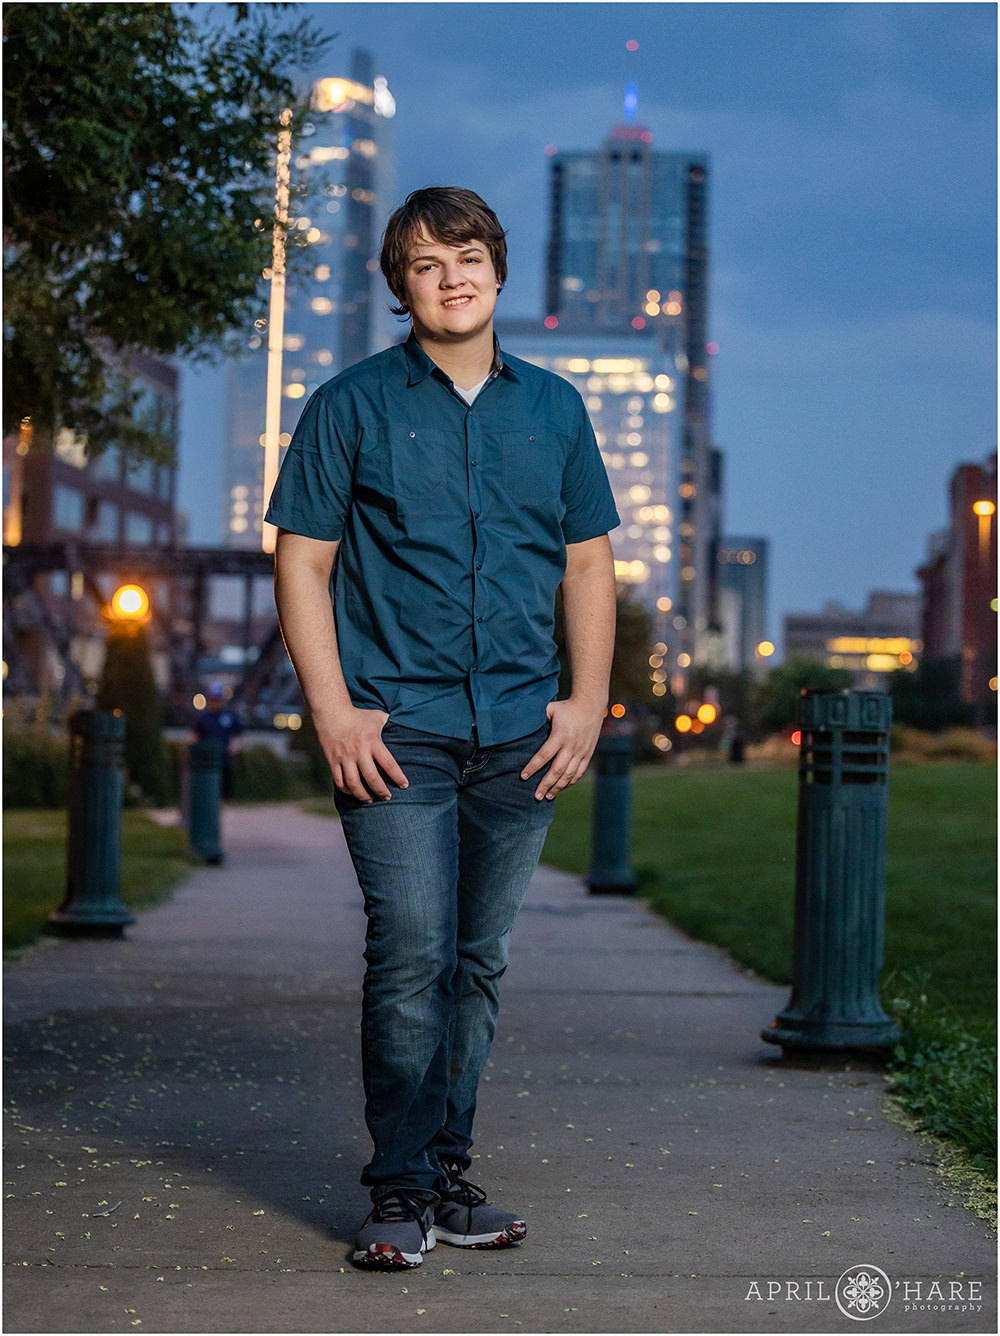 High school senior boy wearing jeans and a blue button down top with a pretty city backdrop lit up at dusk